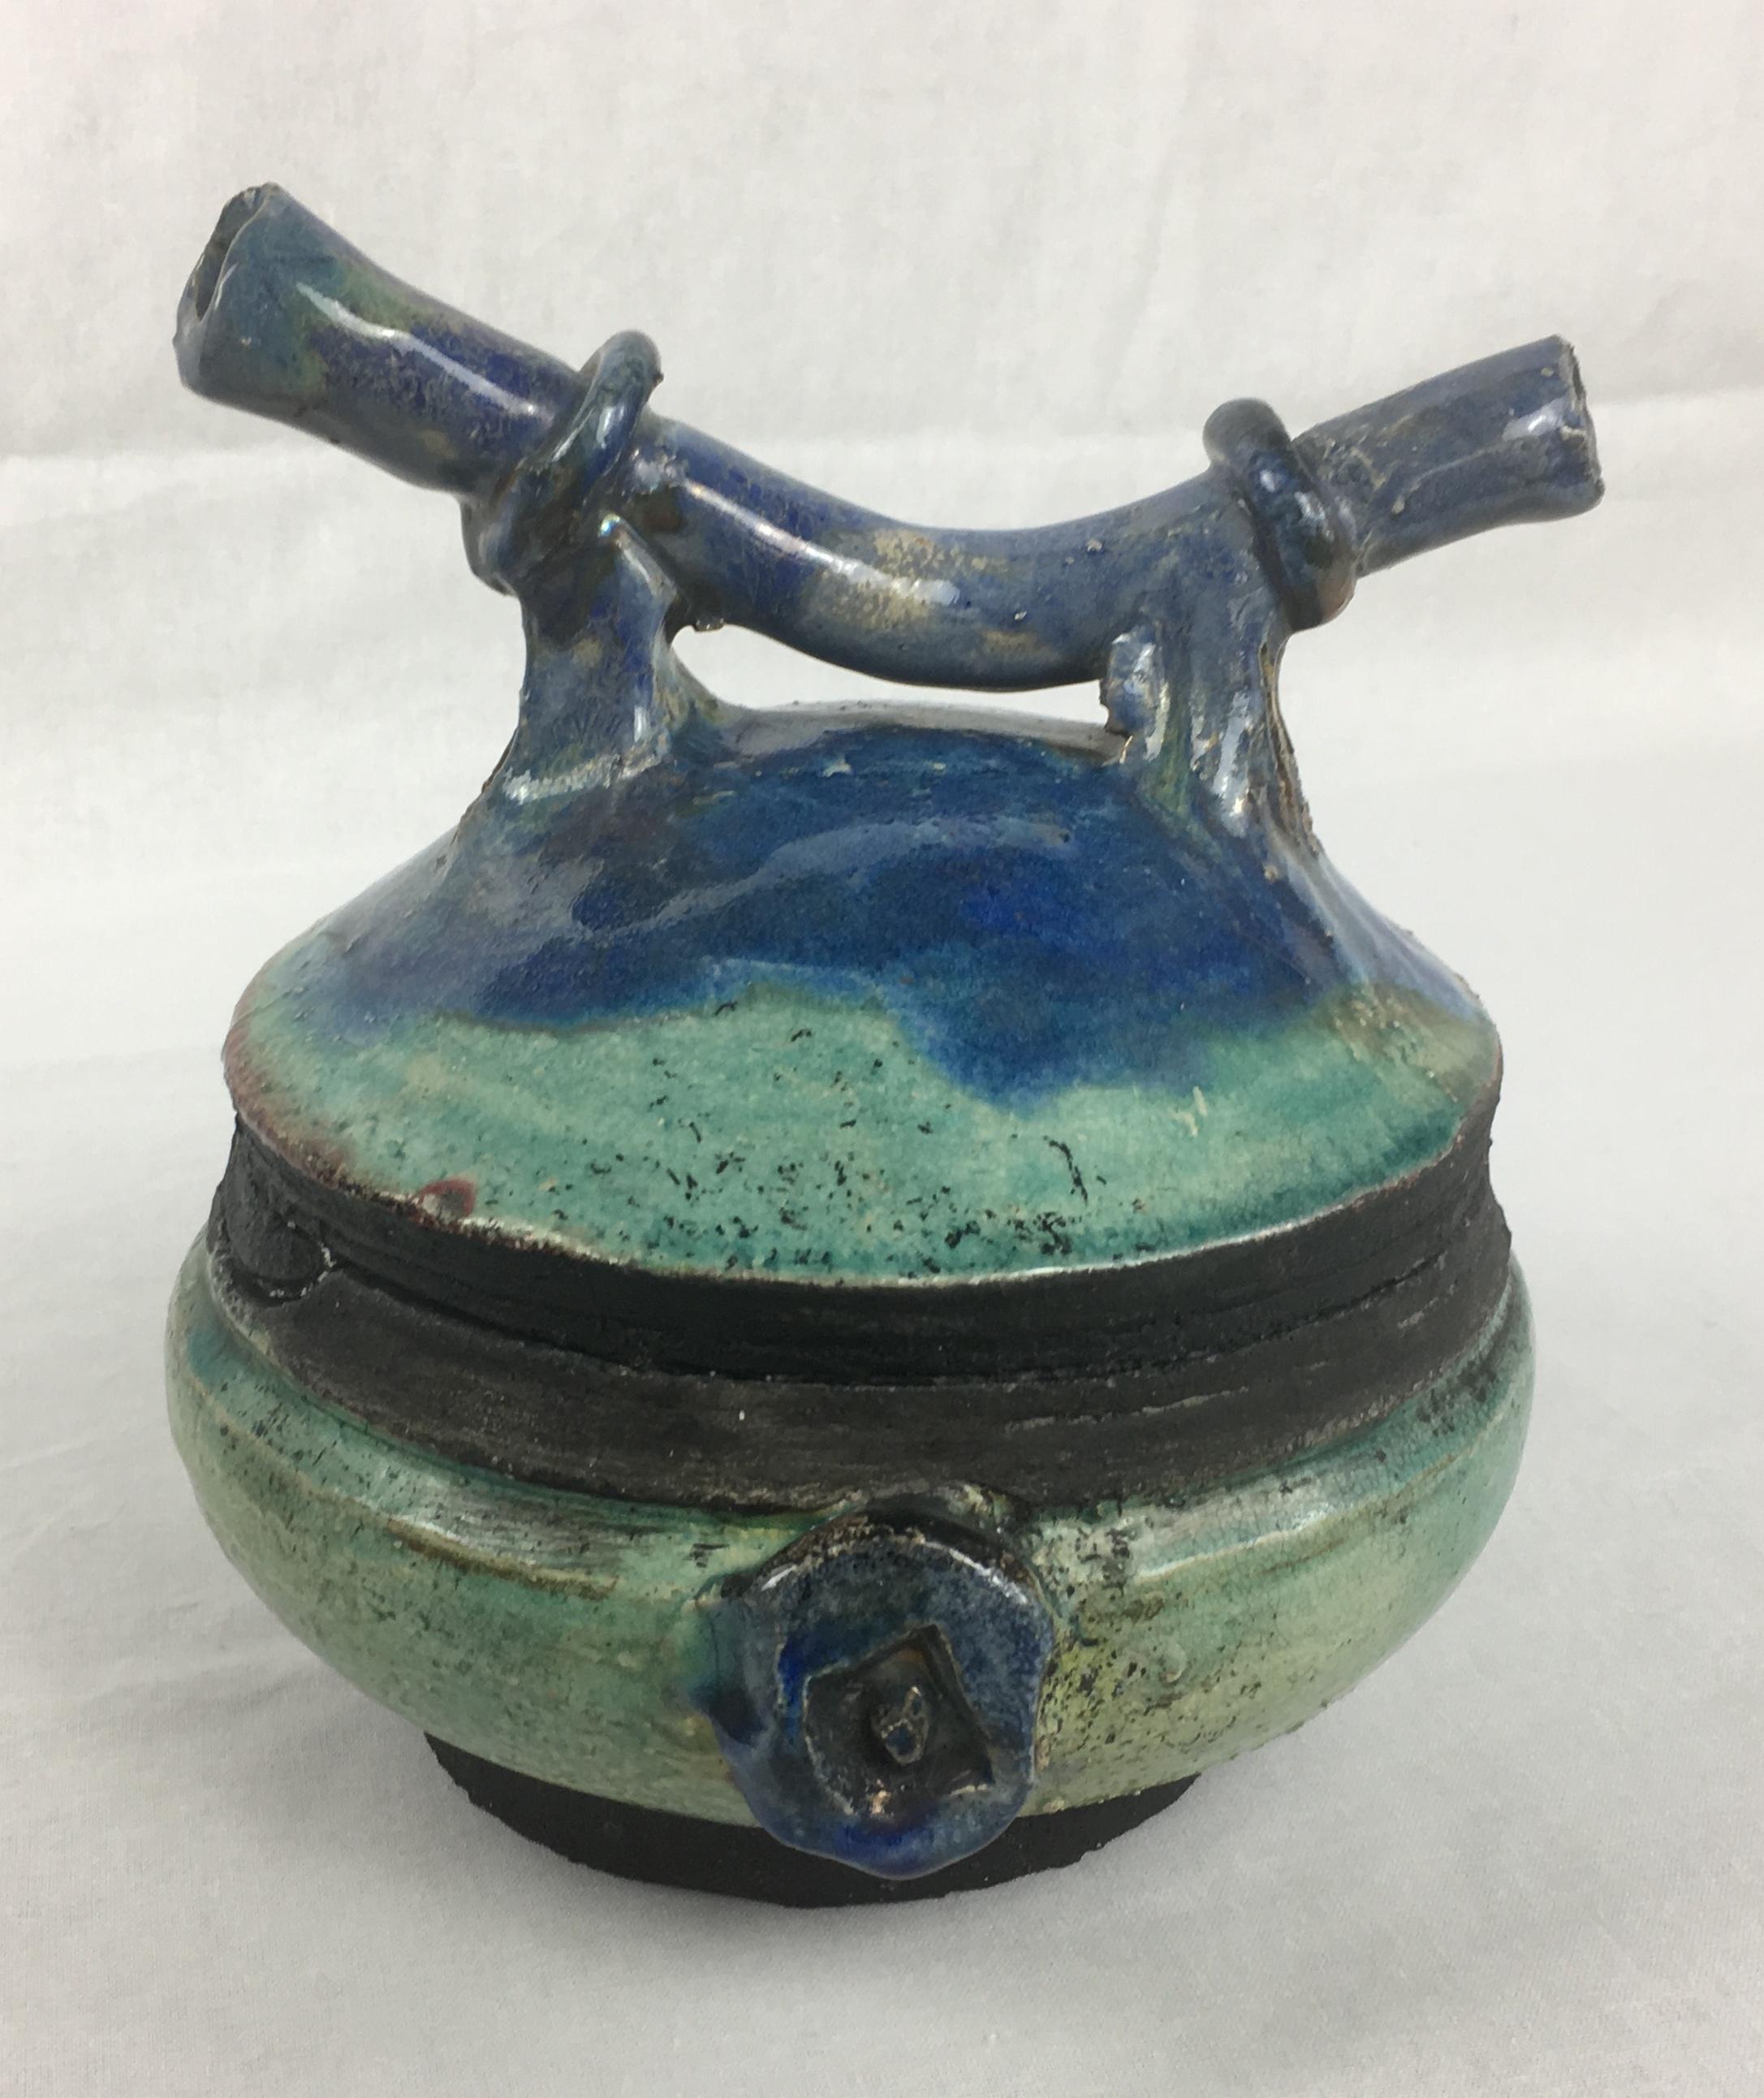 A fine decorative object French inspired by Japanese pottery designs with wonderful prominent blue/green hues. The shape of the top makes this piece exceptionally interesting. 

Artist/maker's mark on the bottom.
 